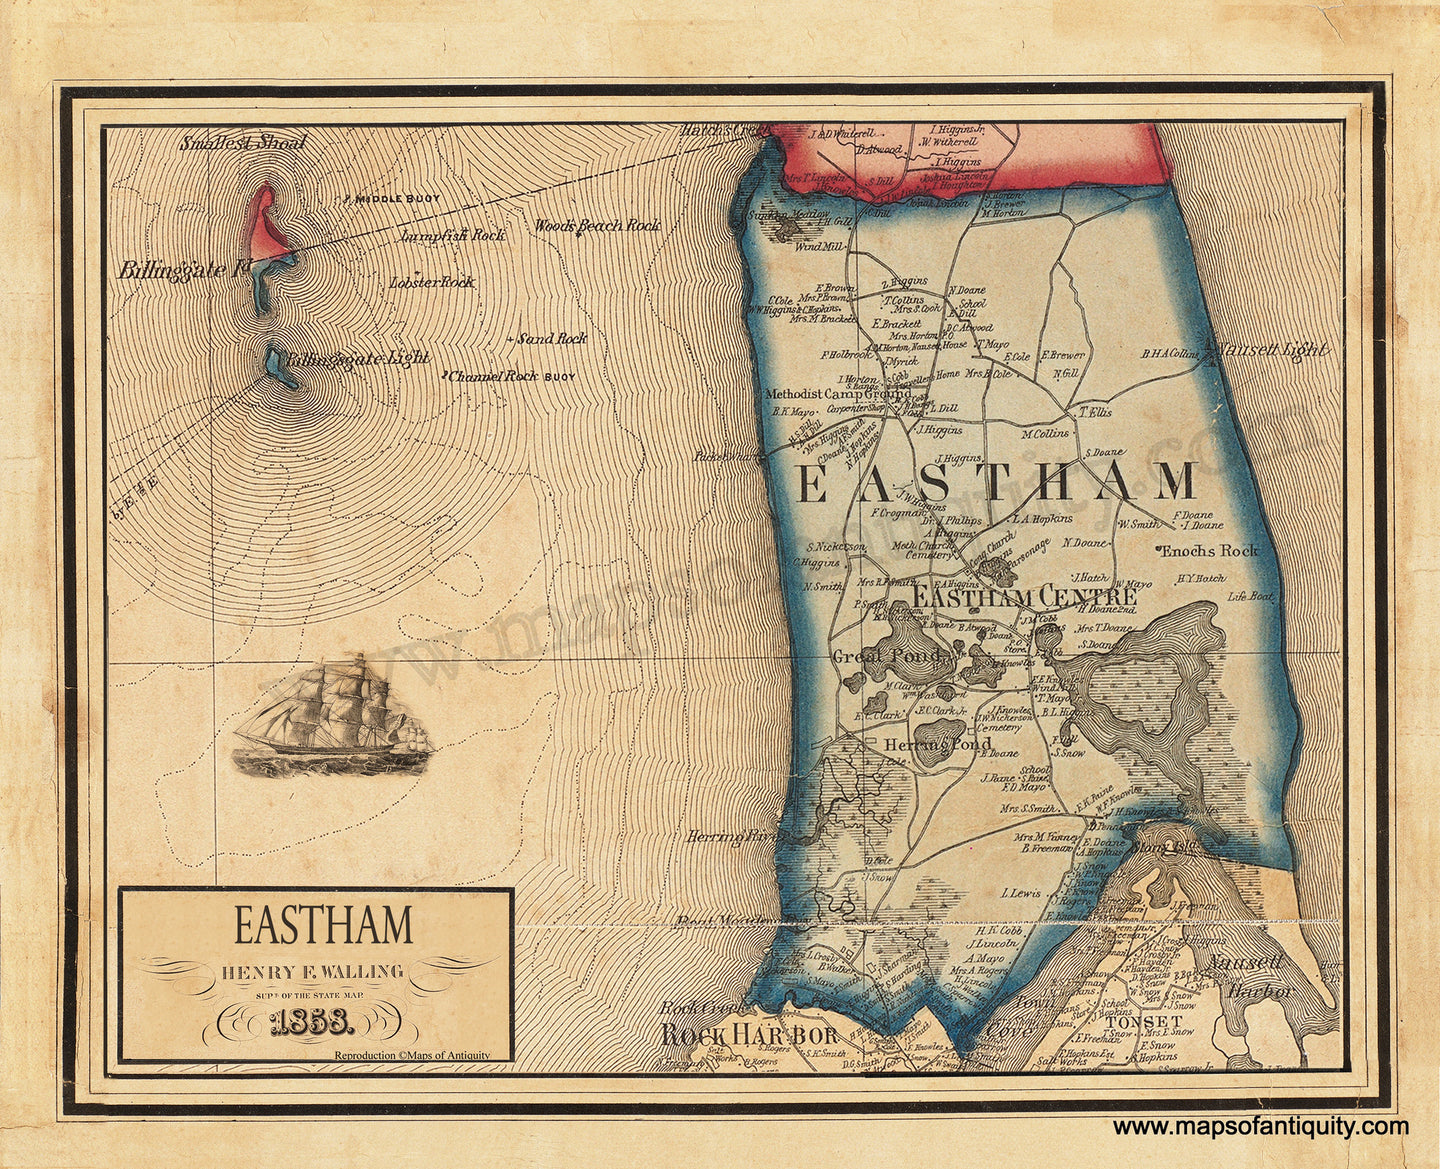 Eastham 1858 - Reproduction Map